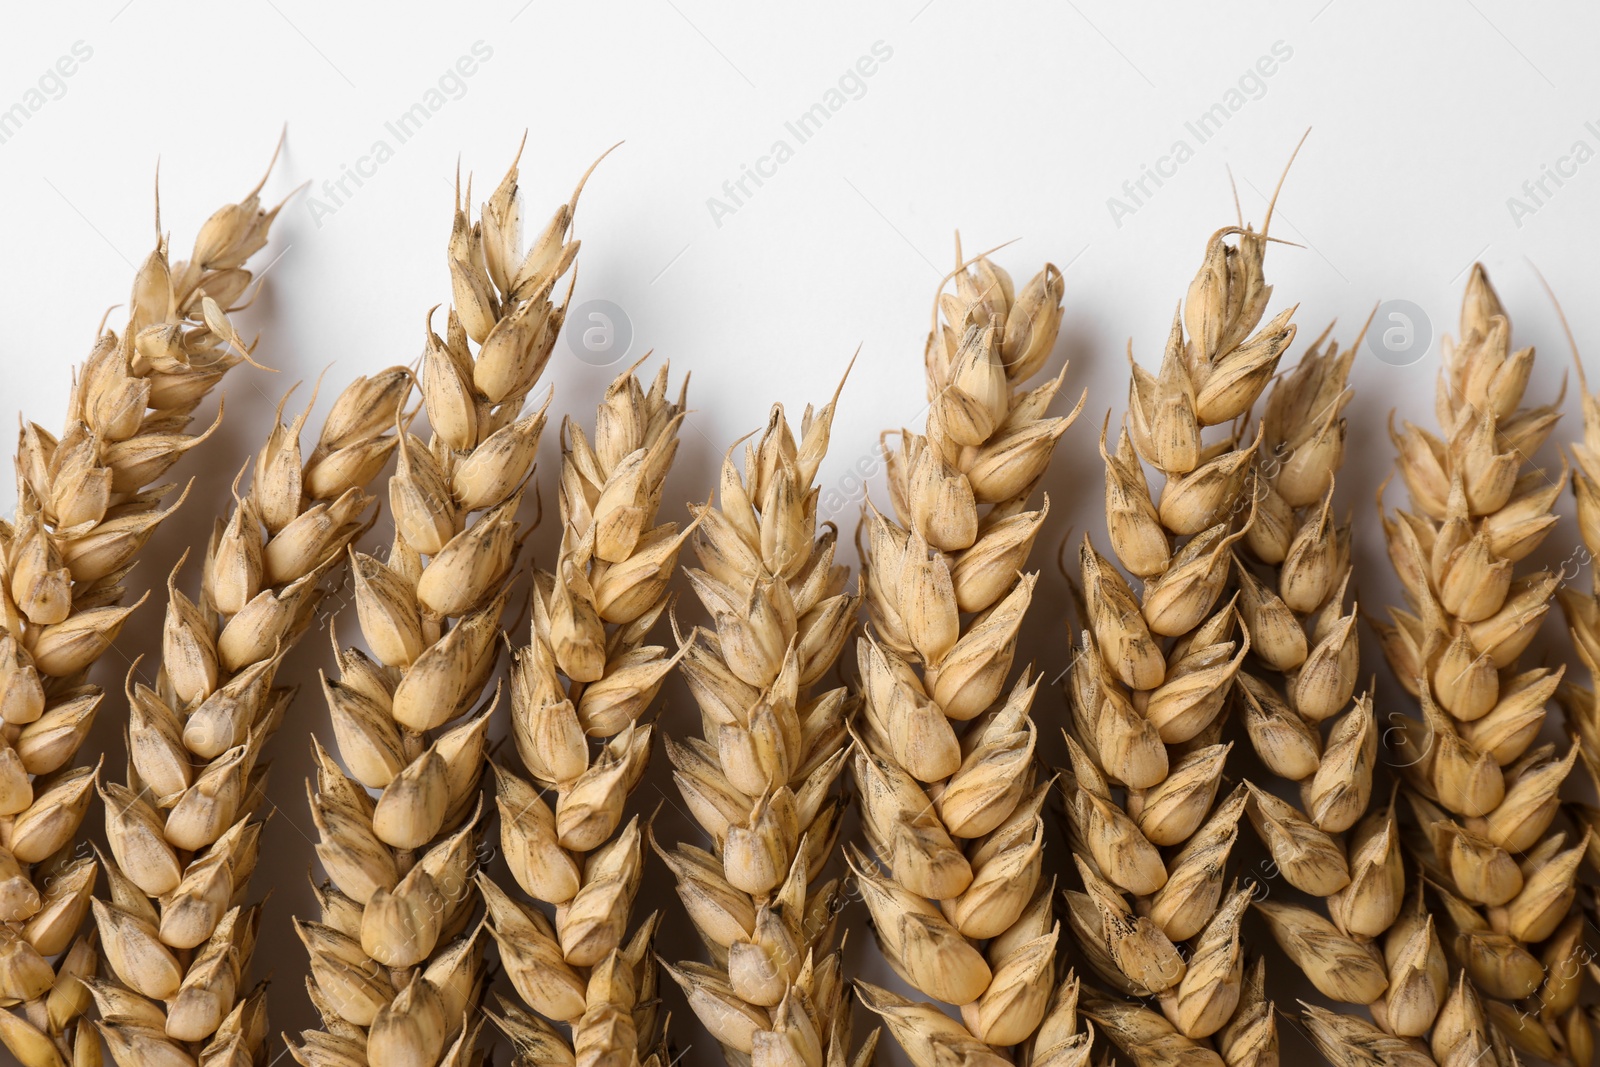 Photo of Ears of wheat on white background, flat lay